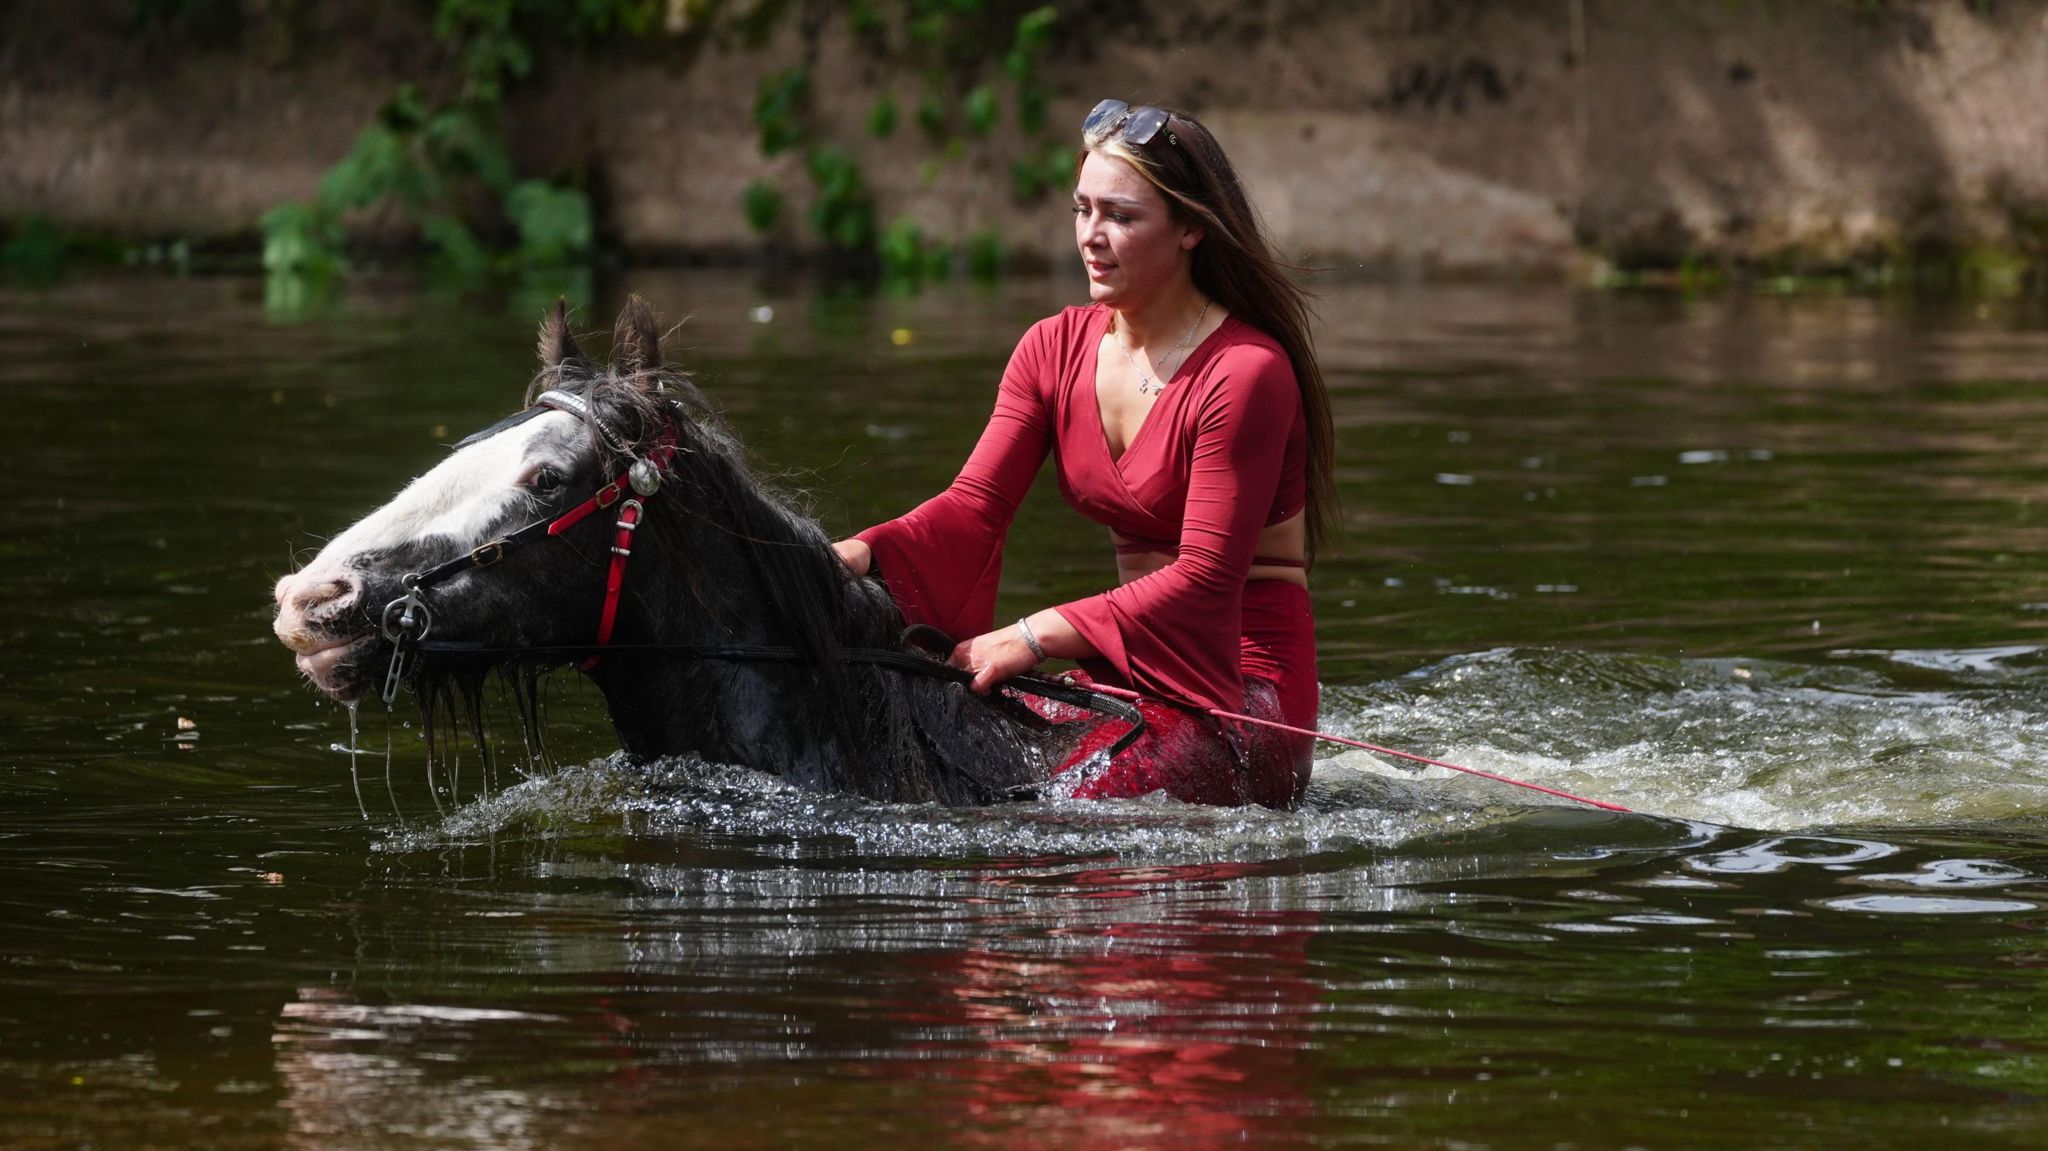 A woman rides her horse through the river at the Appleby Horse Fair, the annual gathering of gypsies and travellers in Appleby, Cumbria